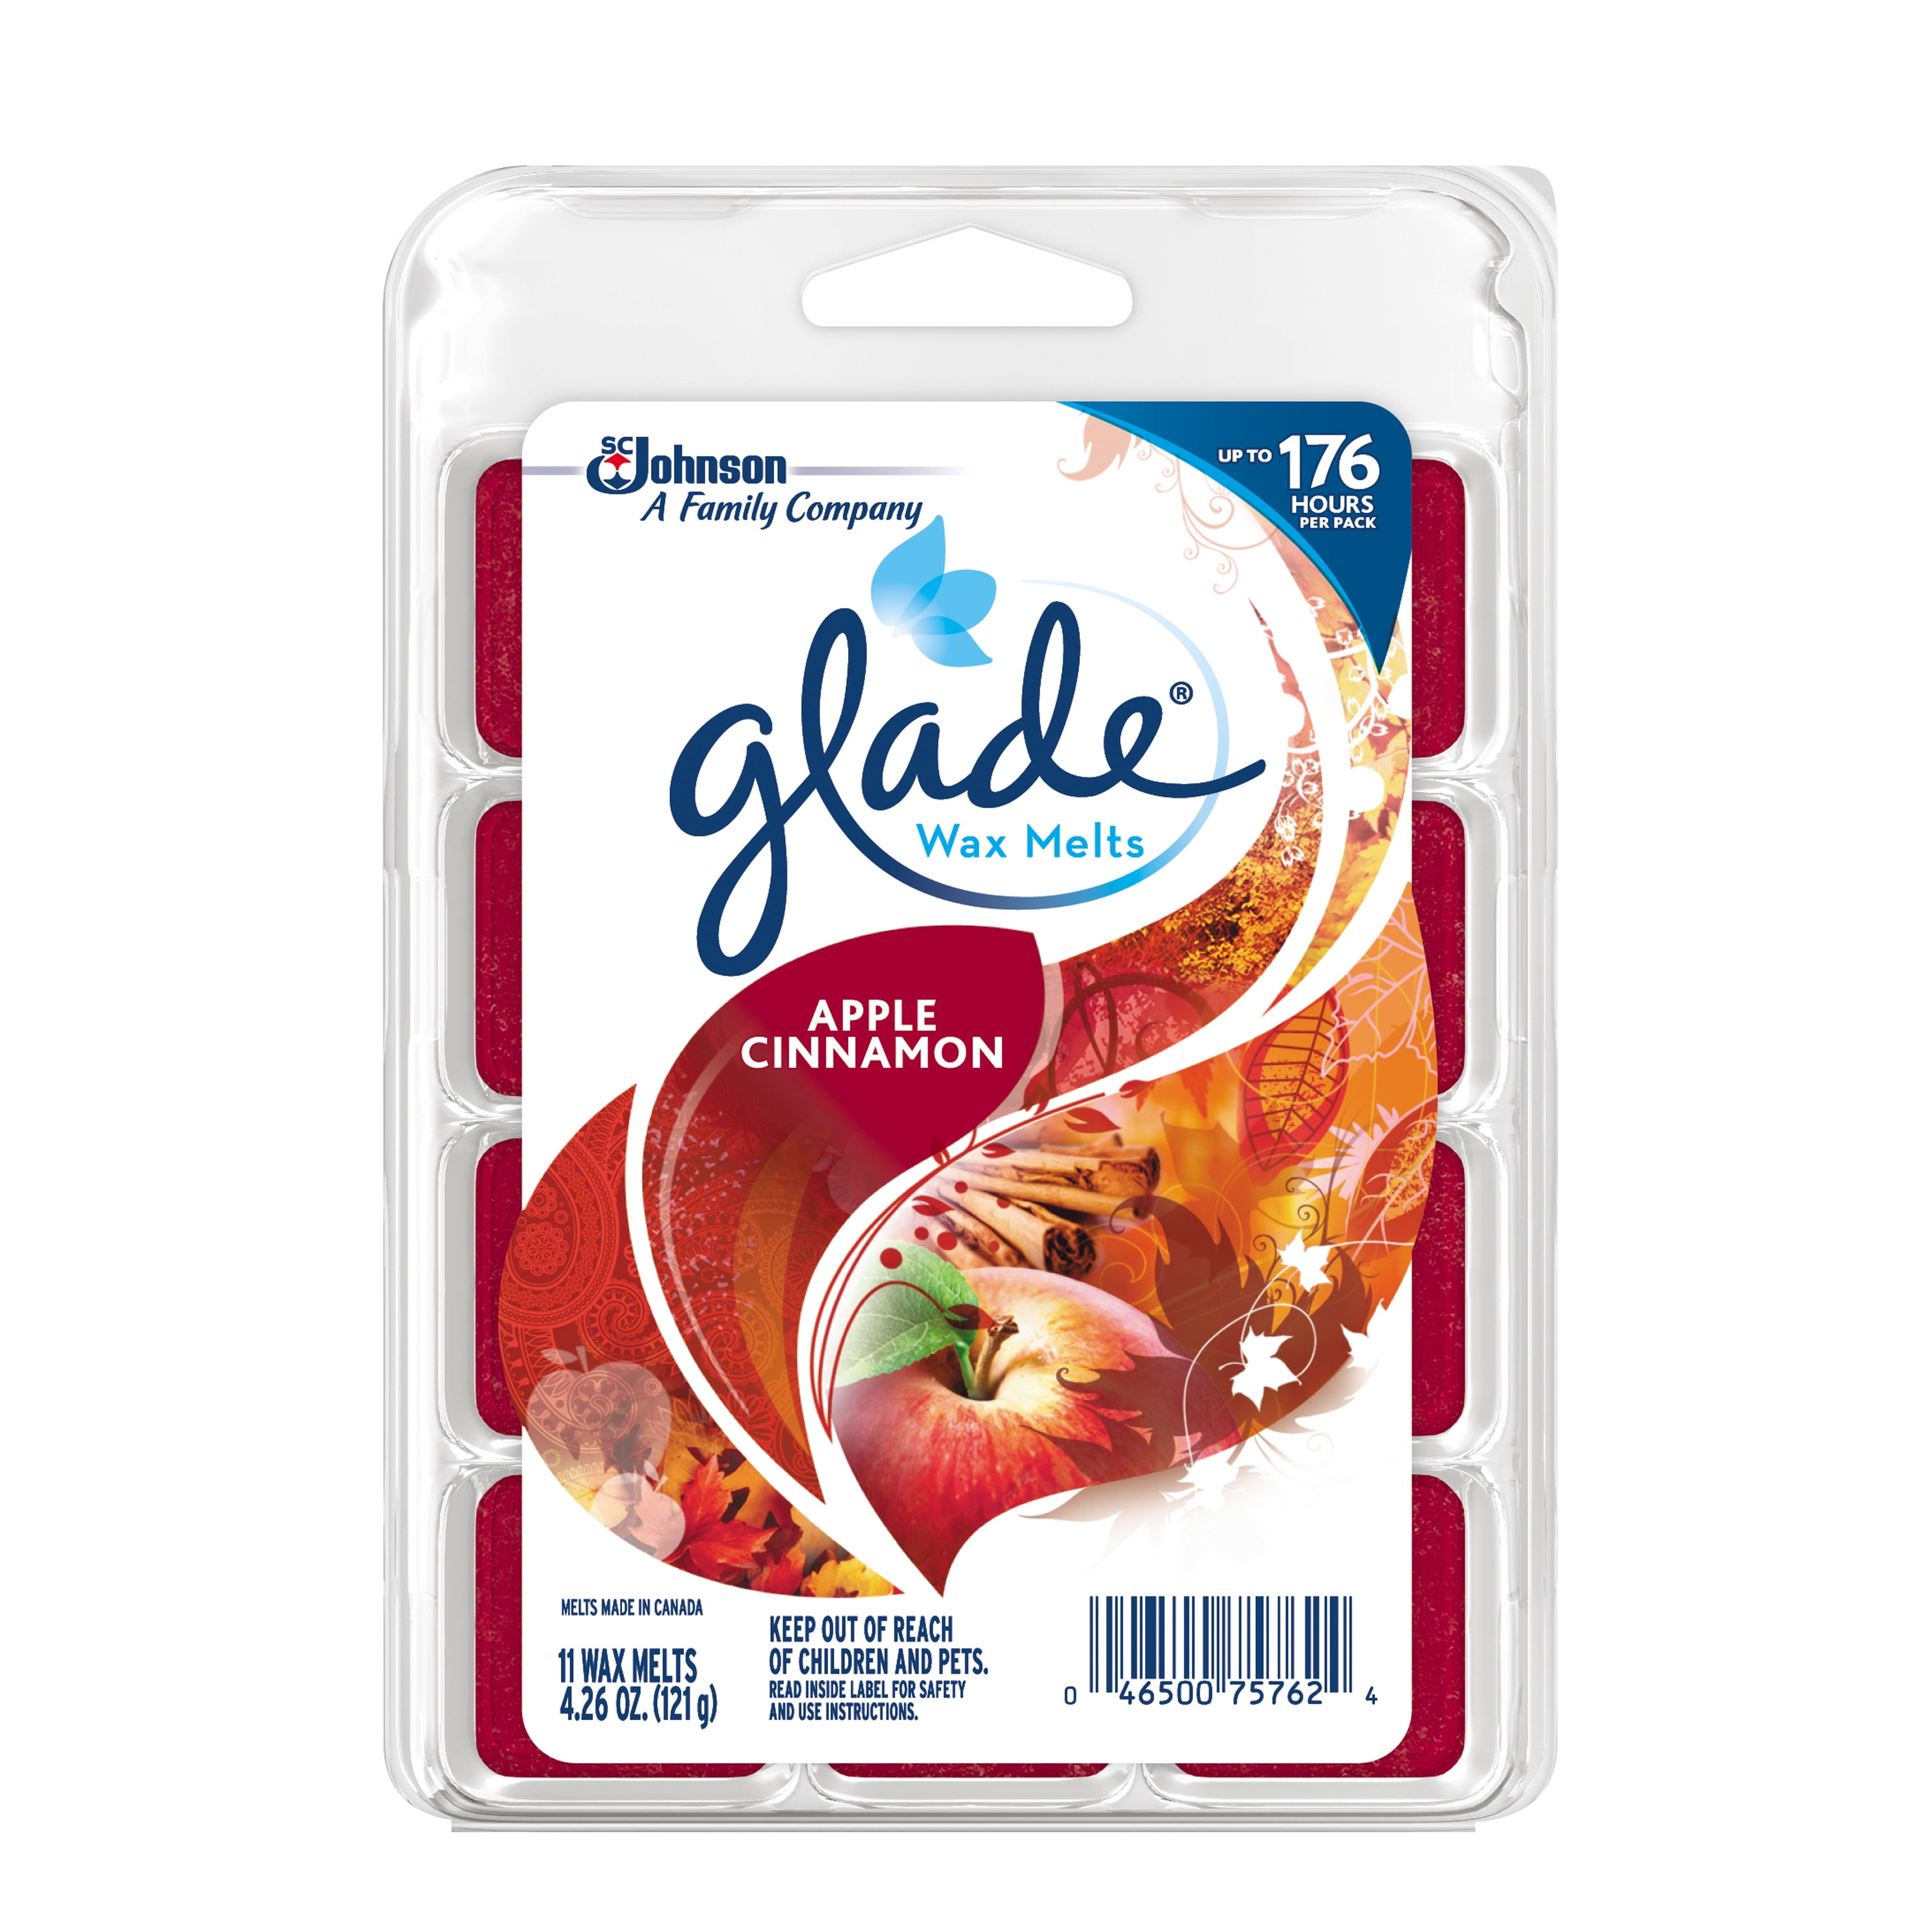 Glade Fresh Berries and Wild Raspberry Wax Melts - Shop Scented Oils & Wax  at H-E-B